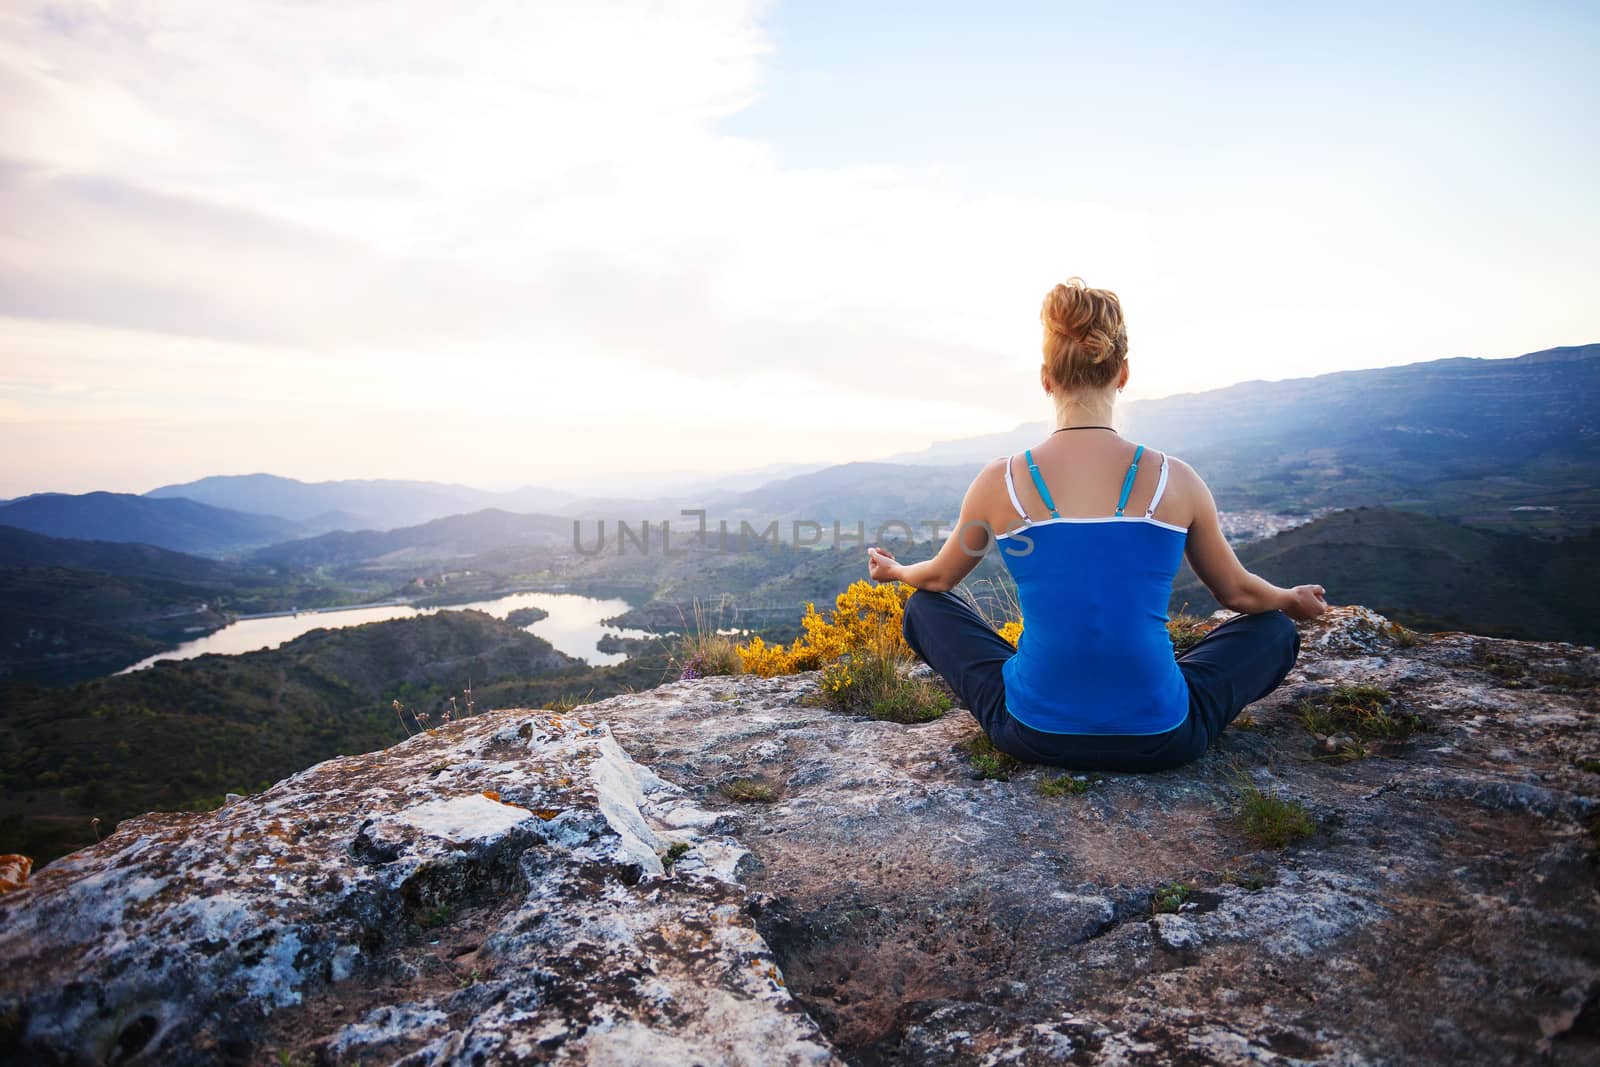 Young woman sitting on a rock and enjoying valley view. Girl sits in asana position.